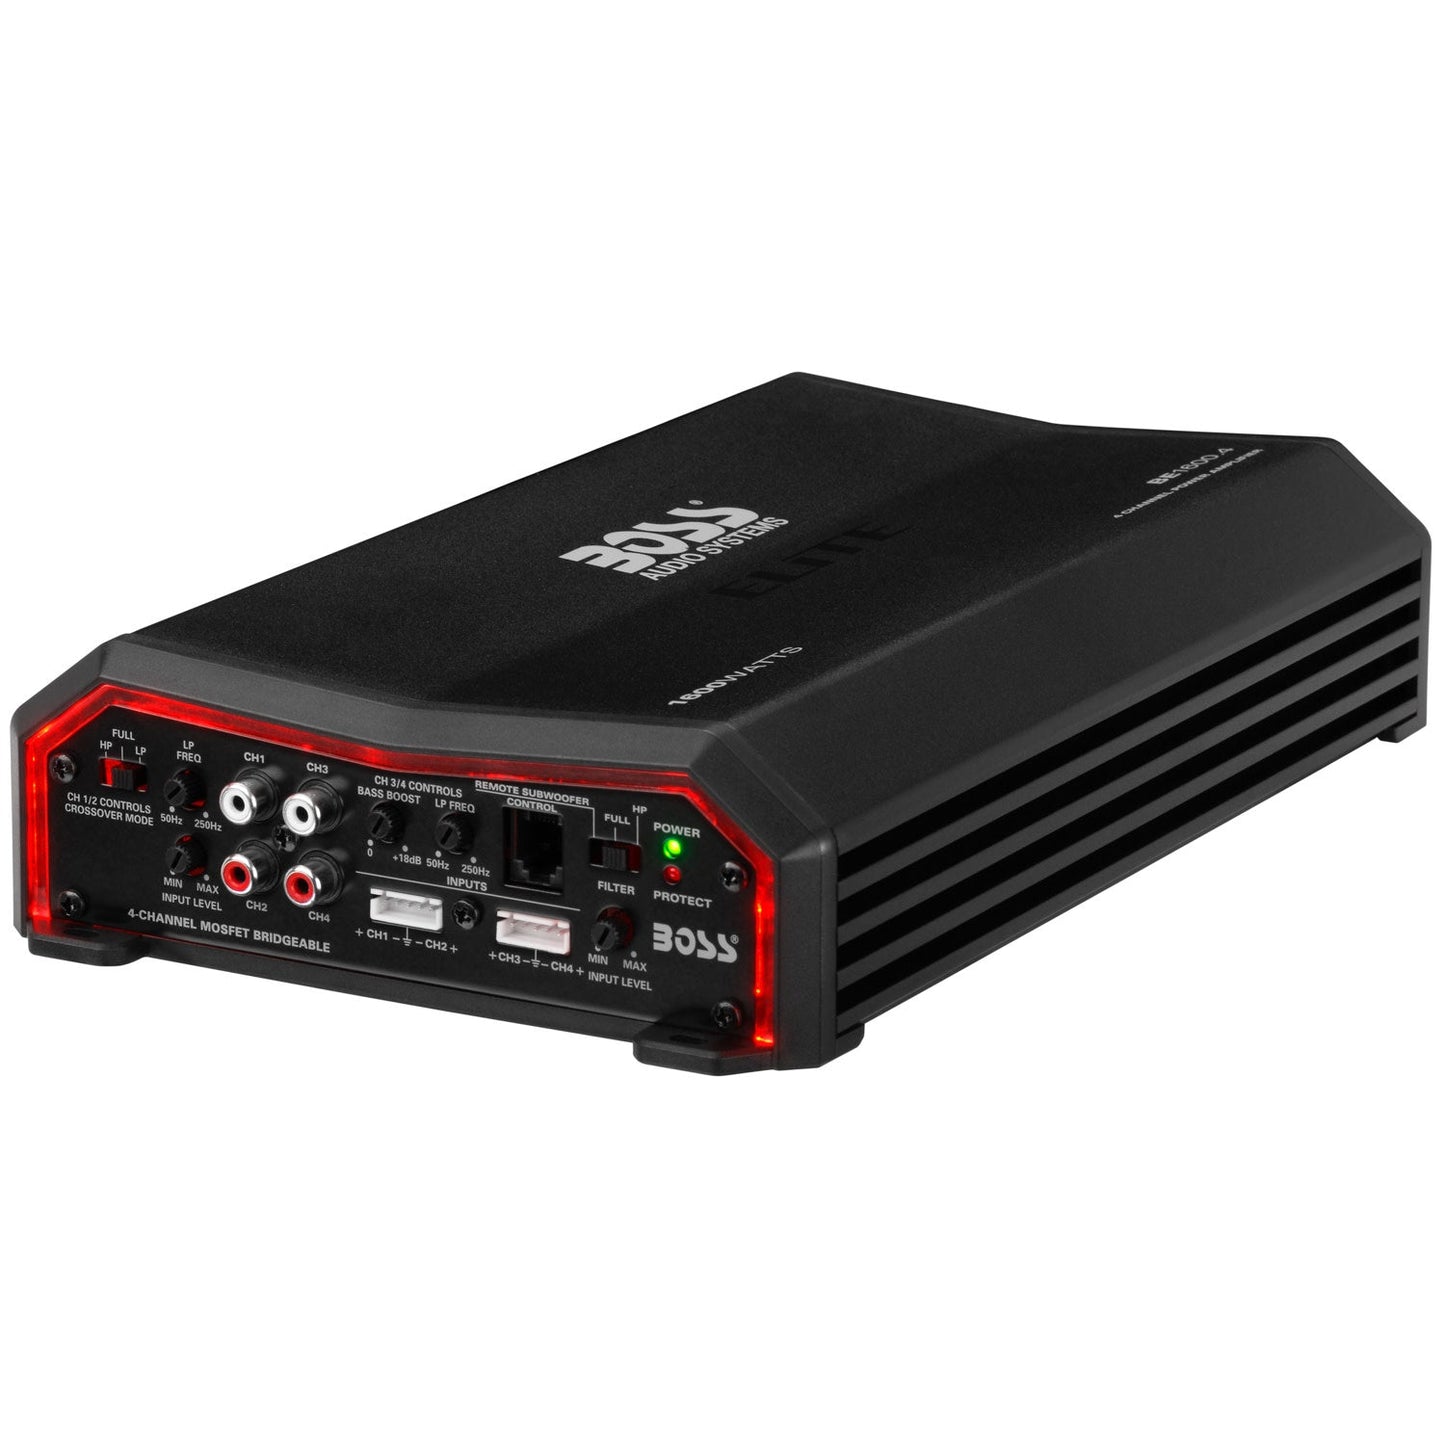 BOSS Audio Systems, Amplifiers > 4-Channel, Model BE1600.4, additional product image